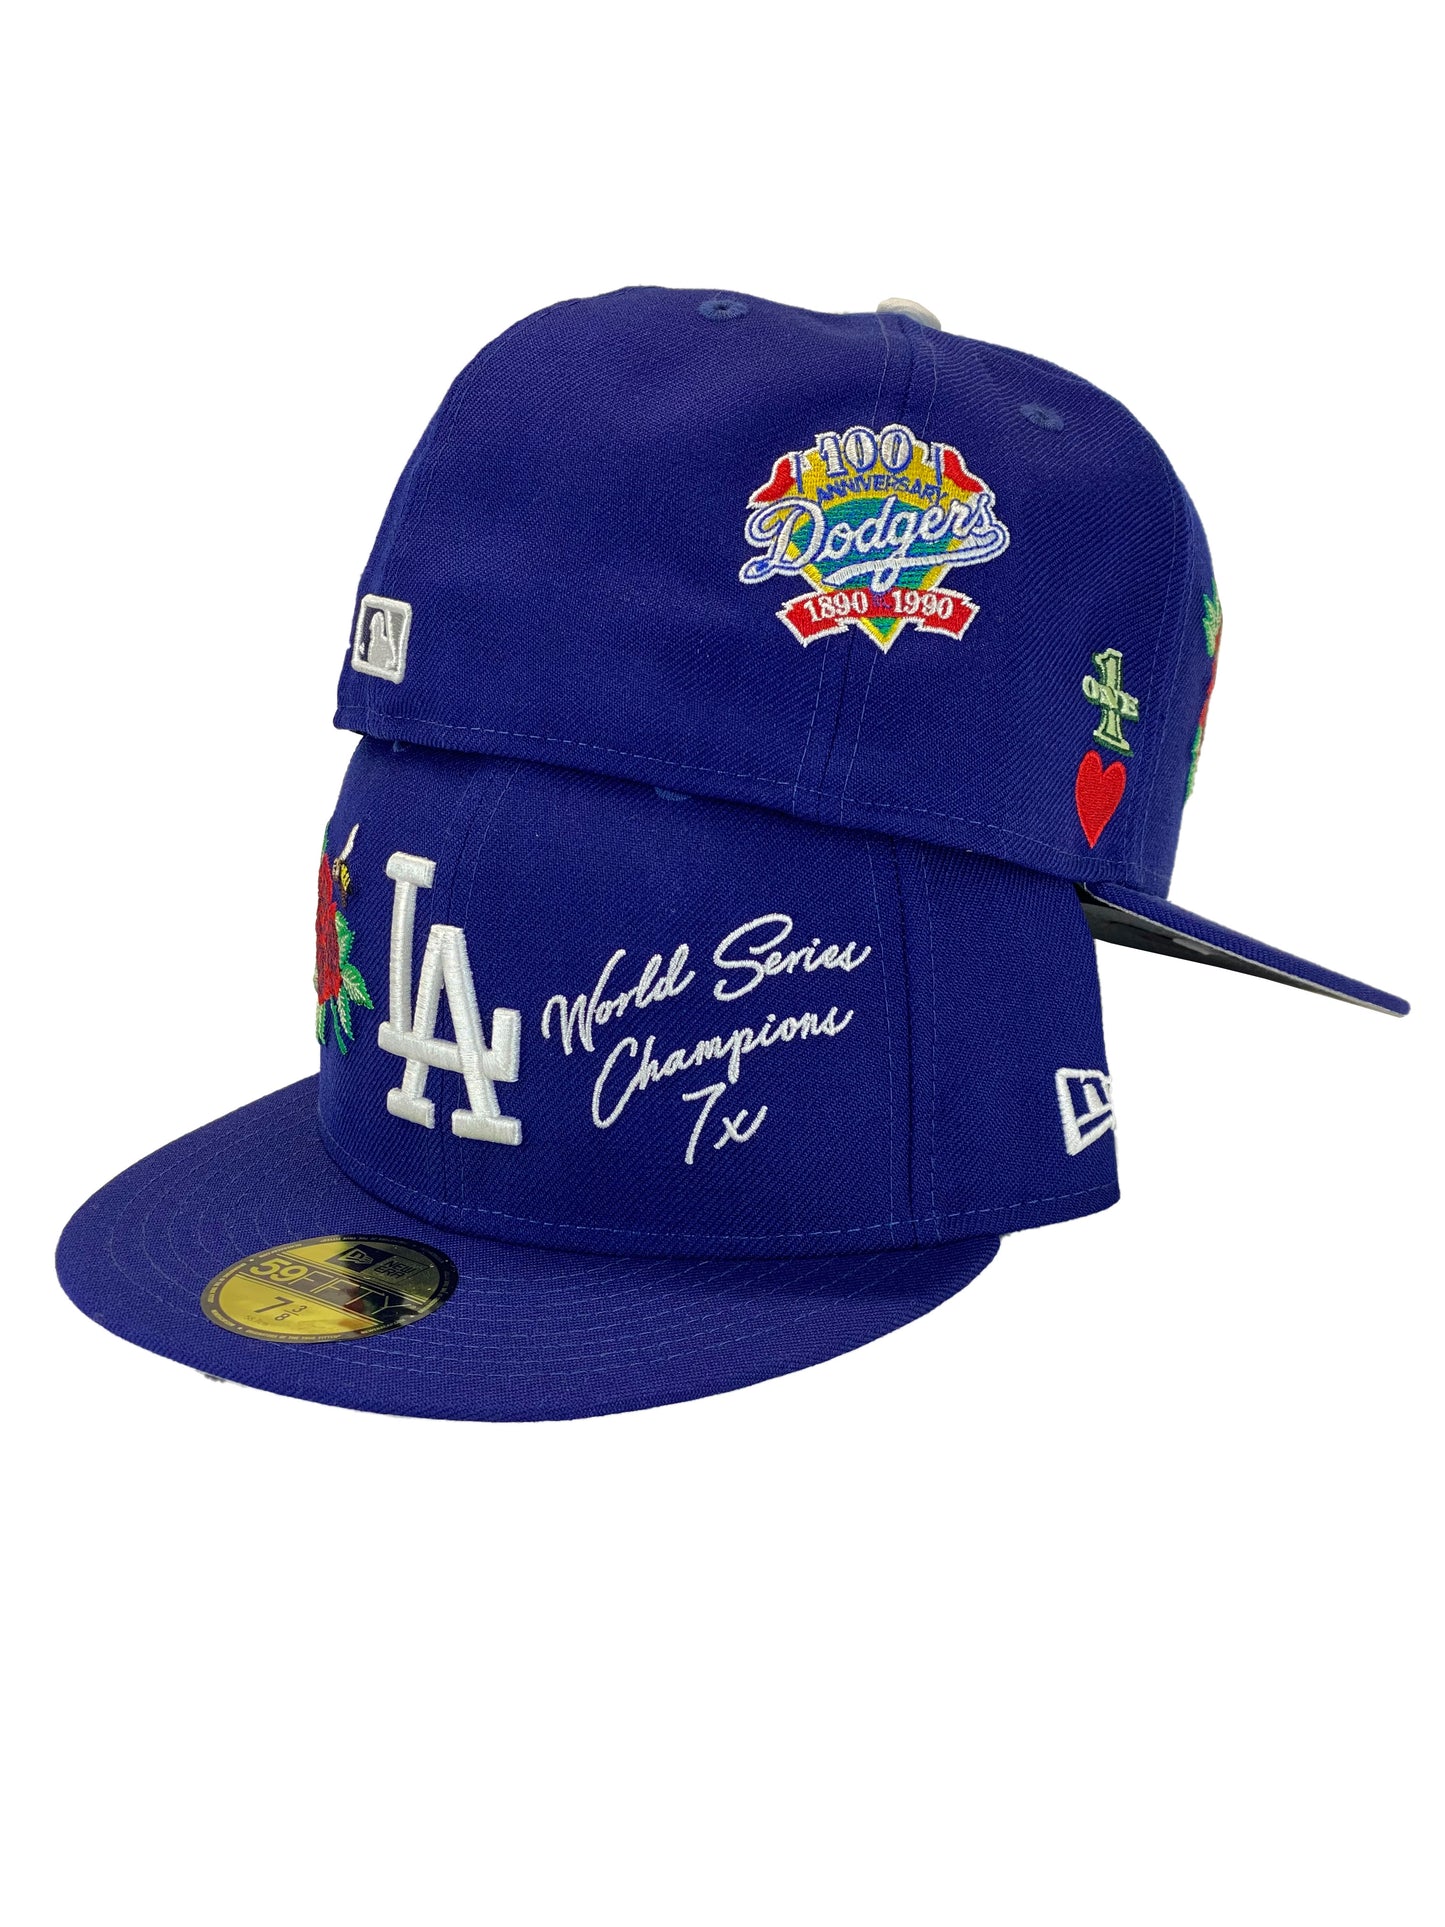 LOS ANGELES DODGERS ICON 2.0 59FIFTY FITTED